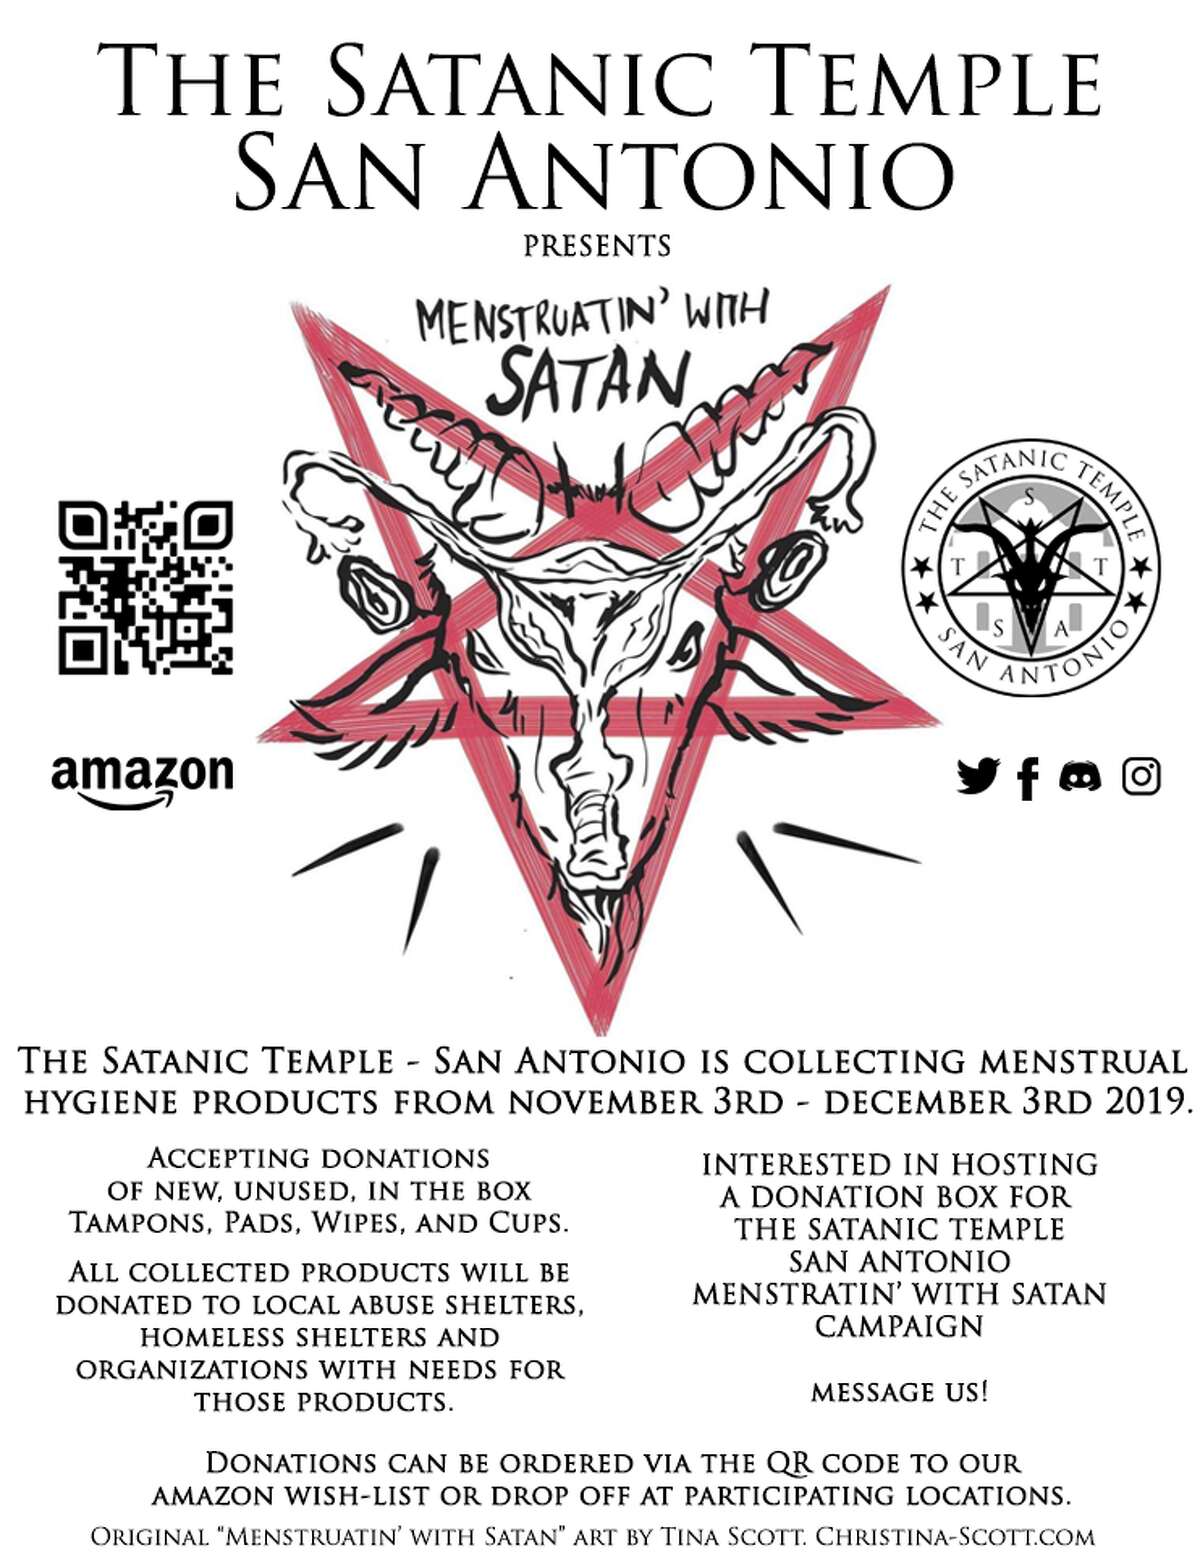 The Satanic Temple of San Antonio is hoping to help take care of costs for menstruation supplies for residents in need. The group, which does not worship nor believe in Satan or the supernatural, is hosting the first-ever "Menstruatin' With Satan" drive across the city. 